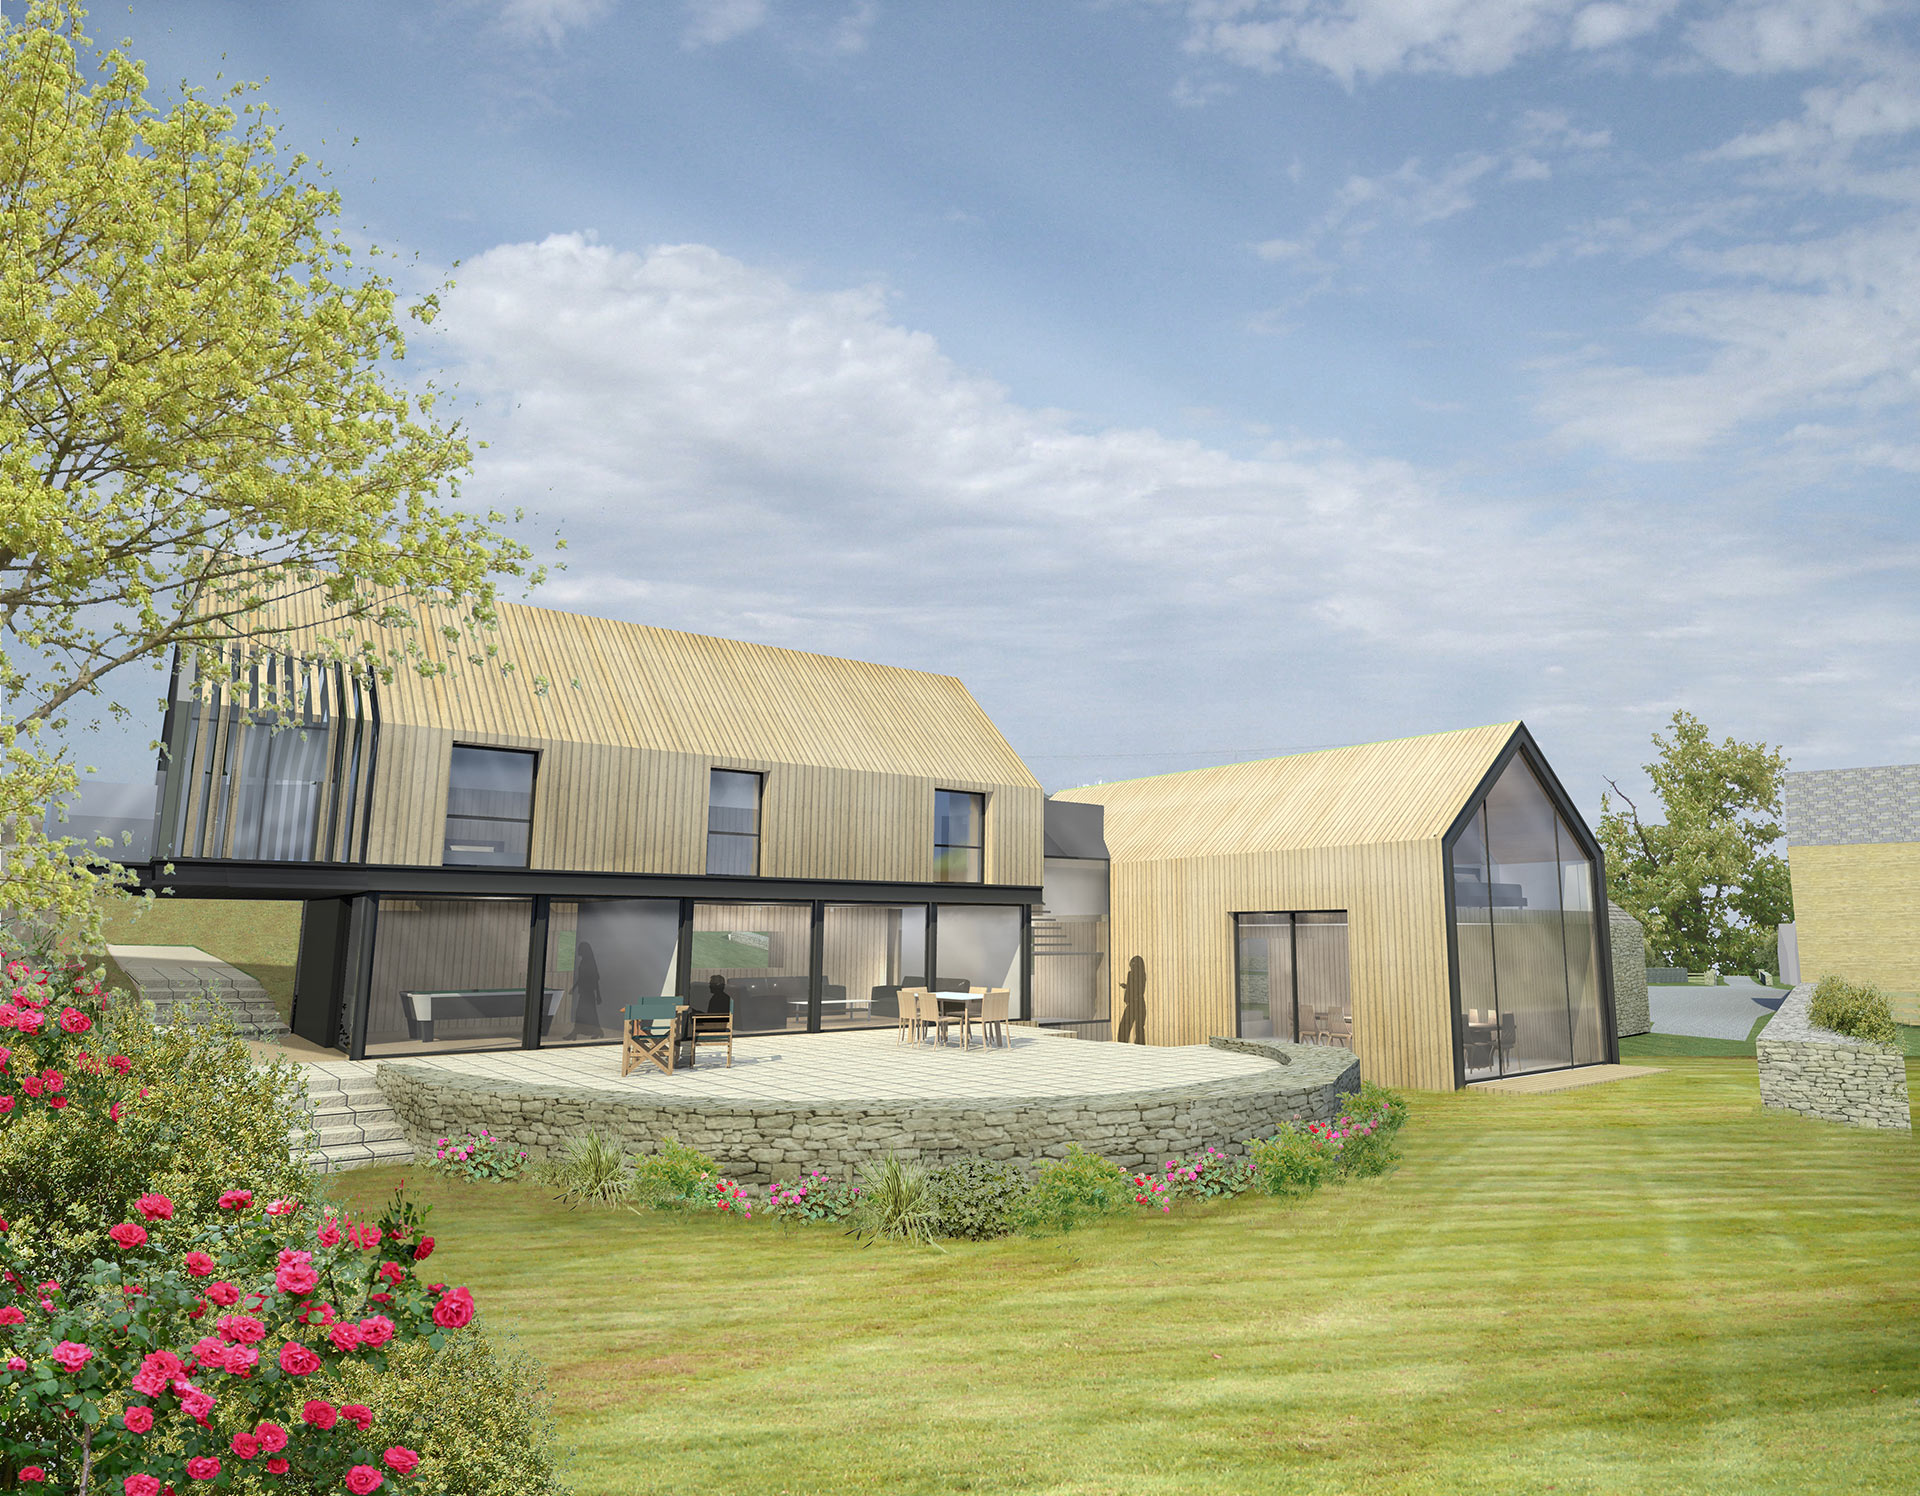 3d visual concept of contemporary house with timber cladding